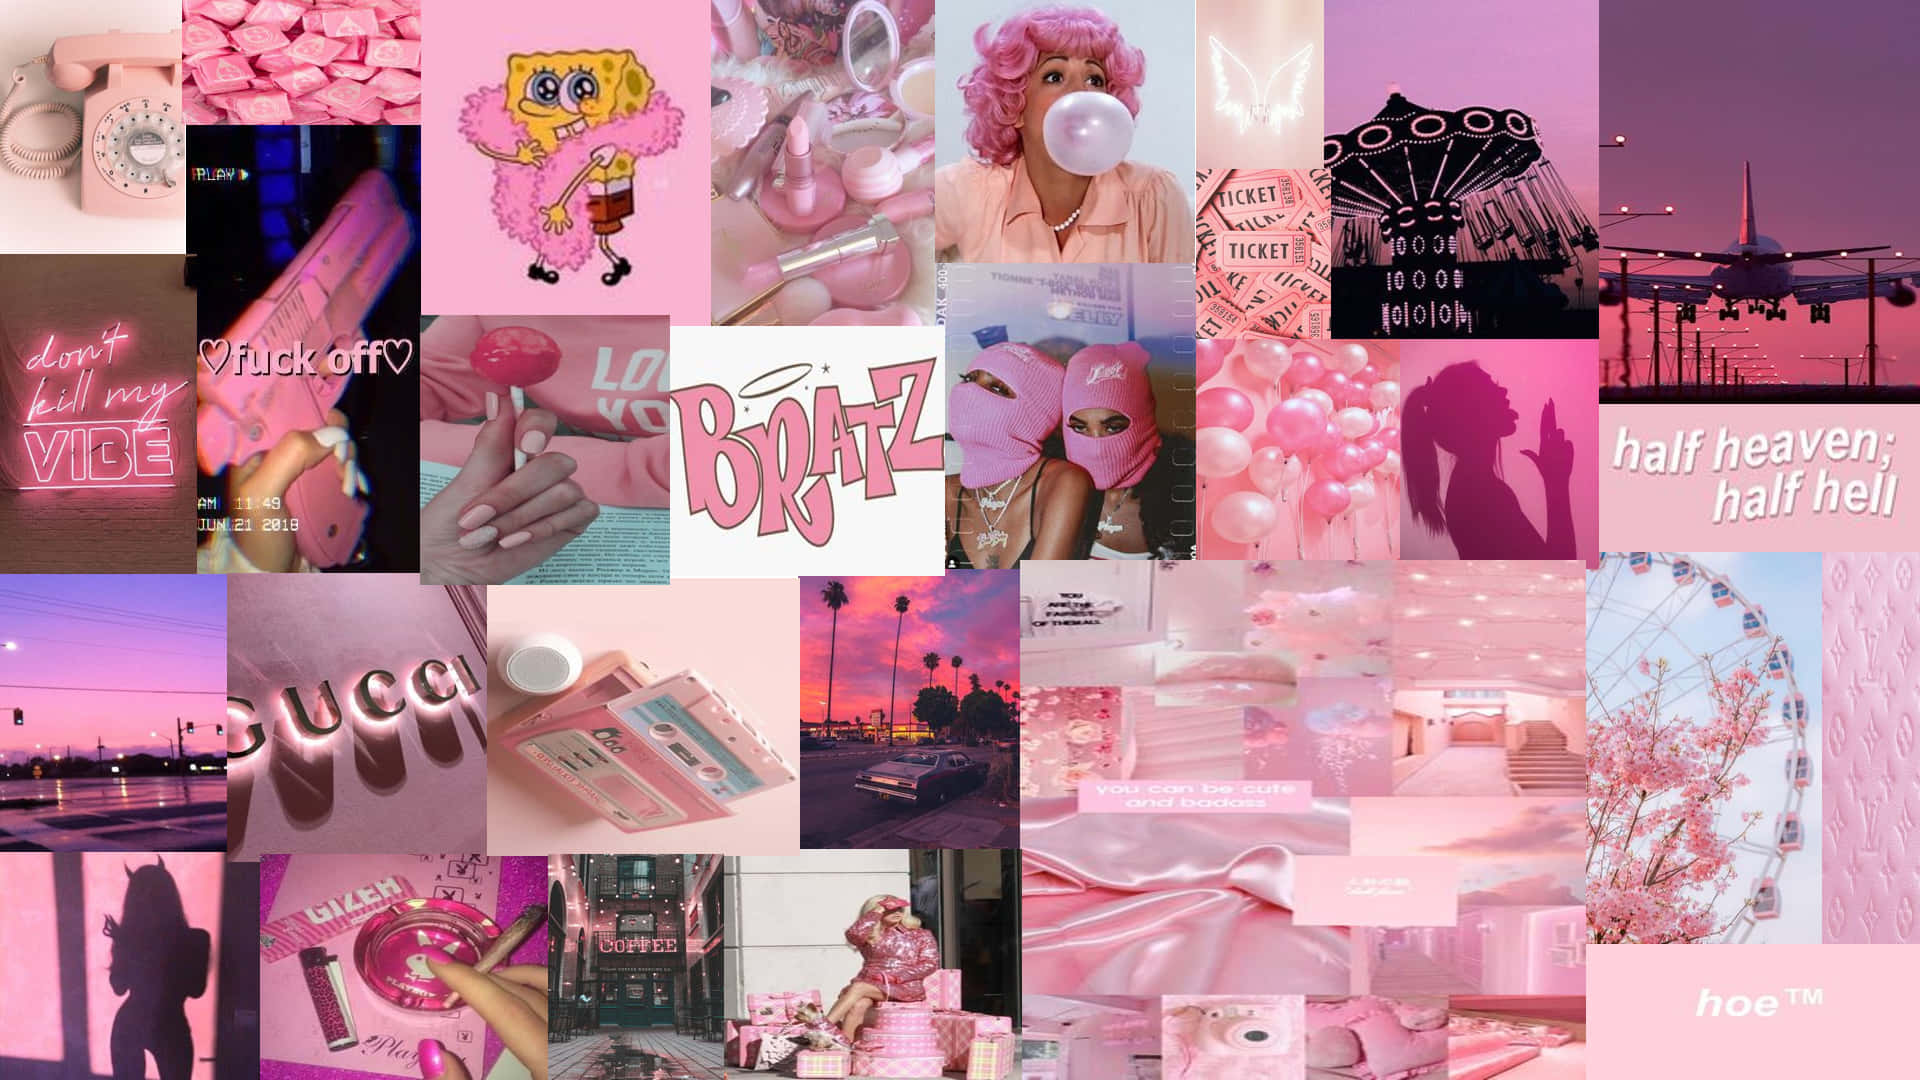 pretty pink backgrounds tumblr